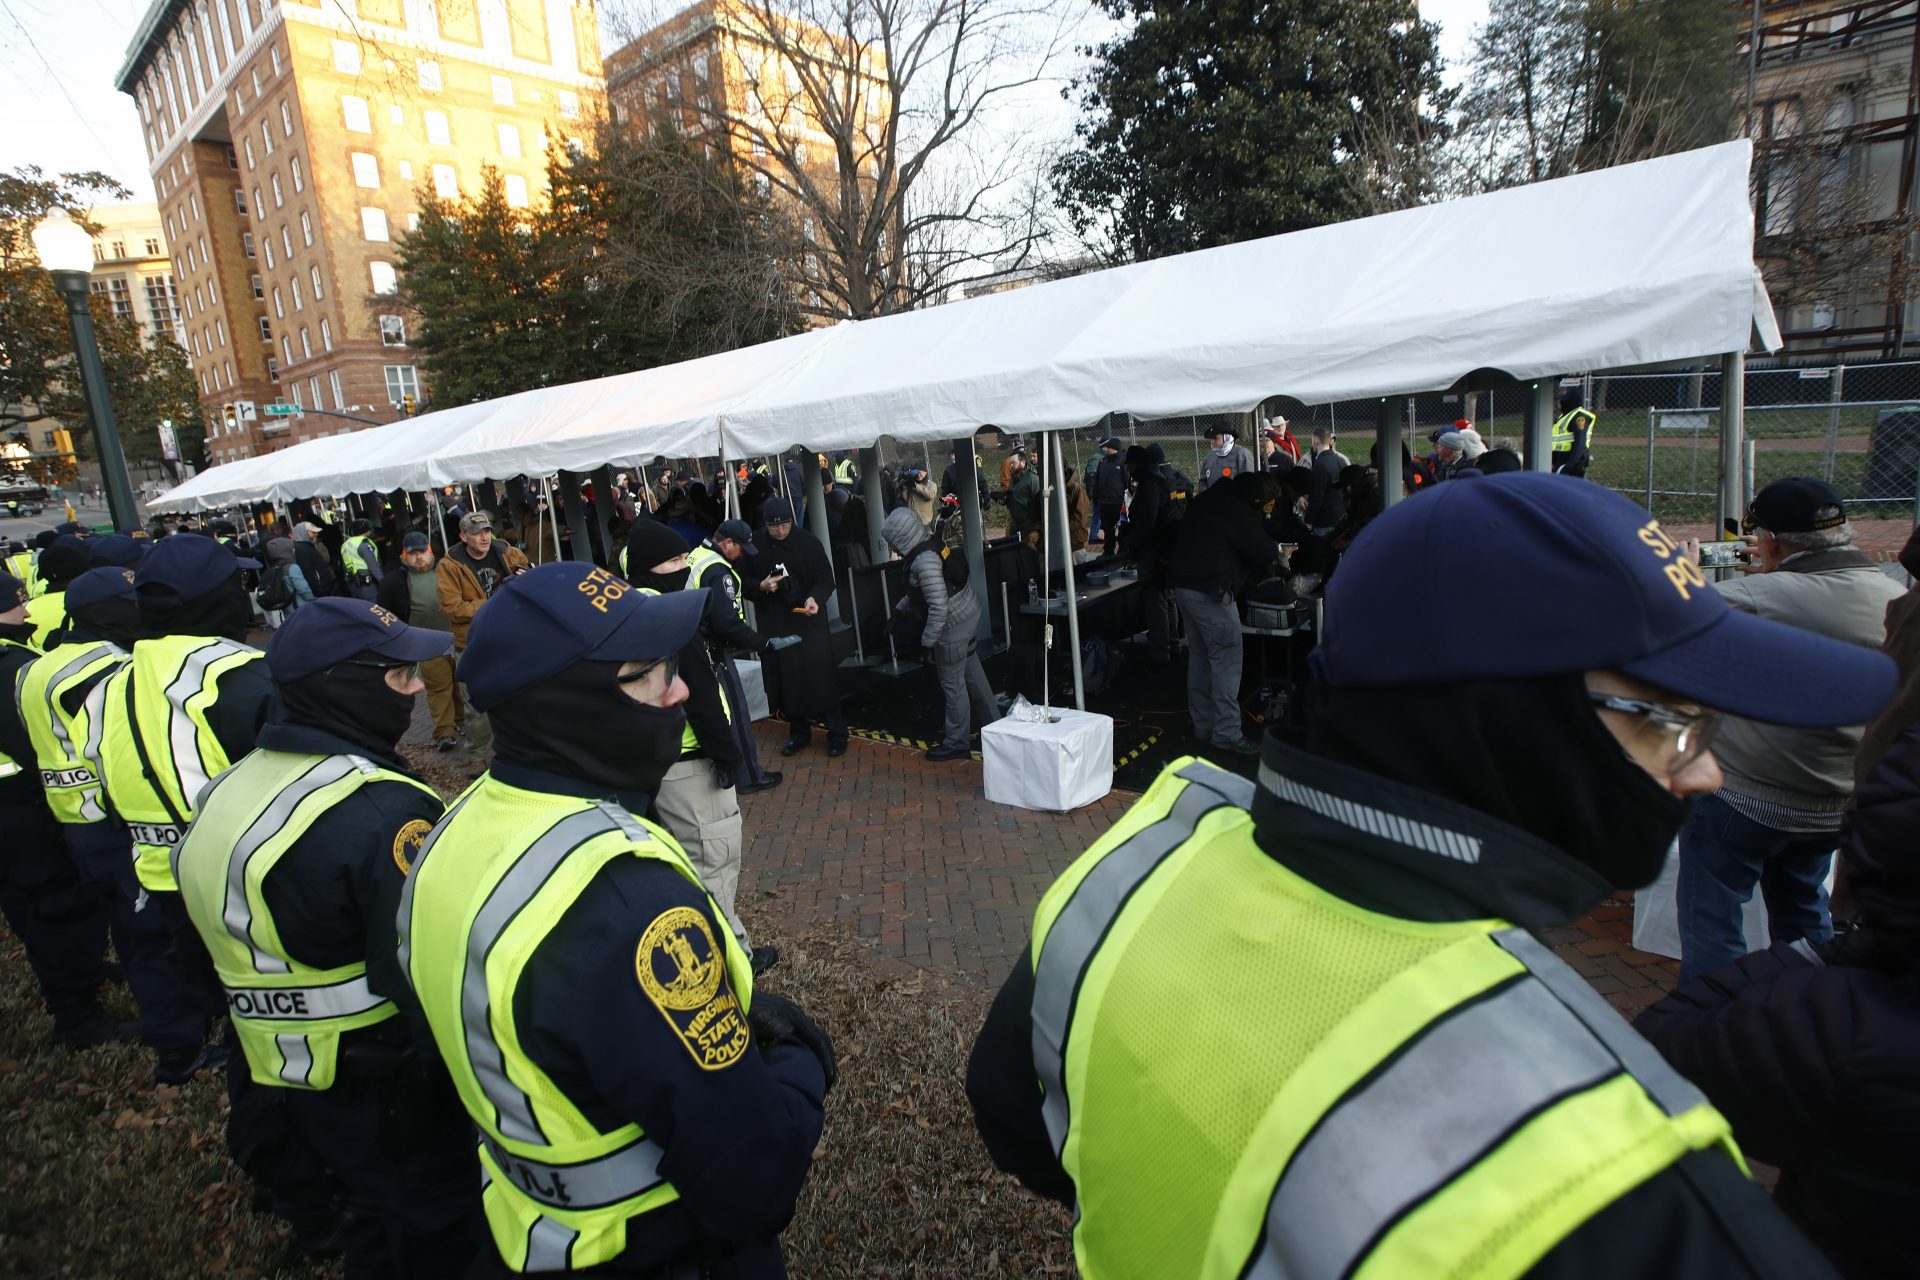 Virginia State police troopers stand near a security checkpoint before demonstrators enter the capitol grounds ahead of a pro gun rally, Monday, Jan. 20, 2020, in Richmond, Va.